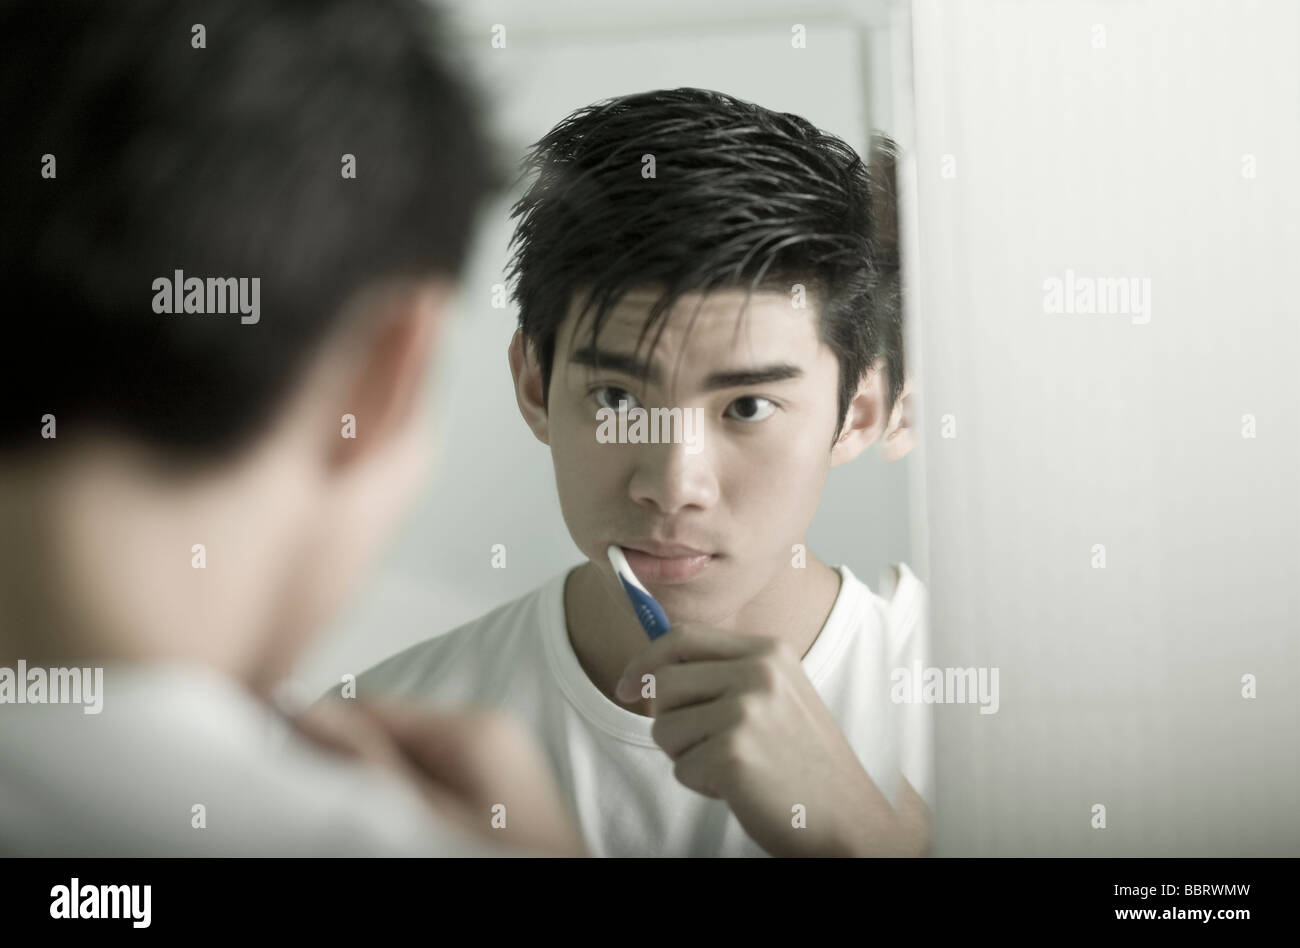 Young man brushing teeth, looking at reflection in mirror Stock Photo